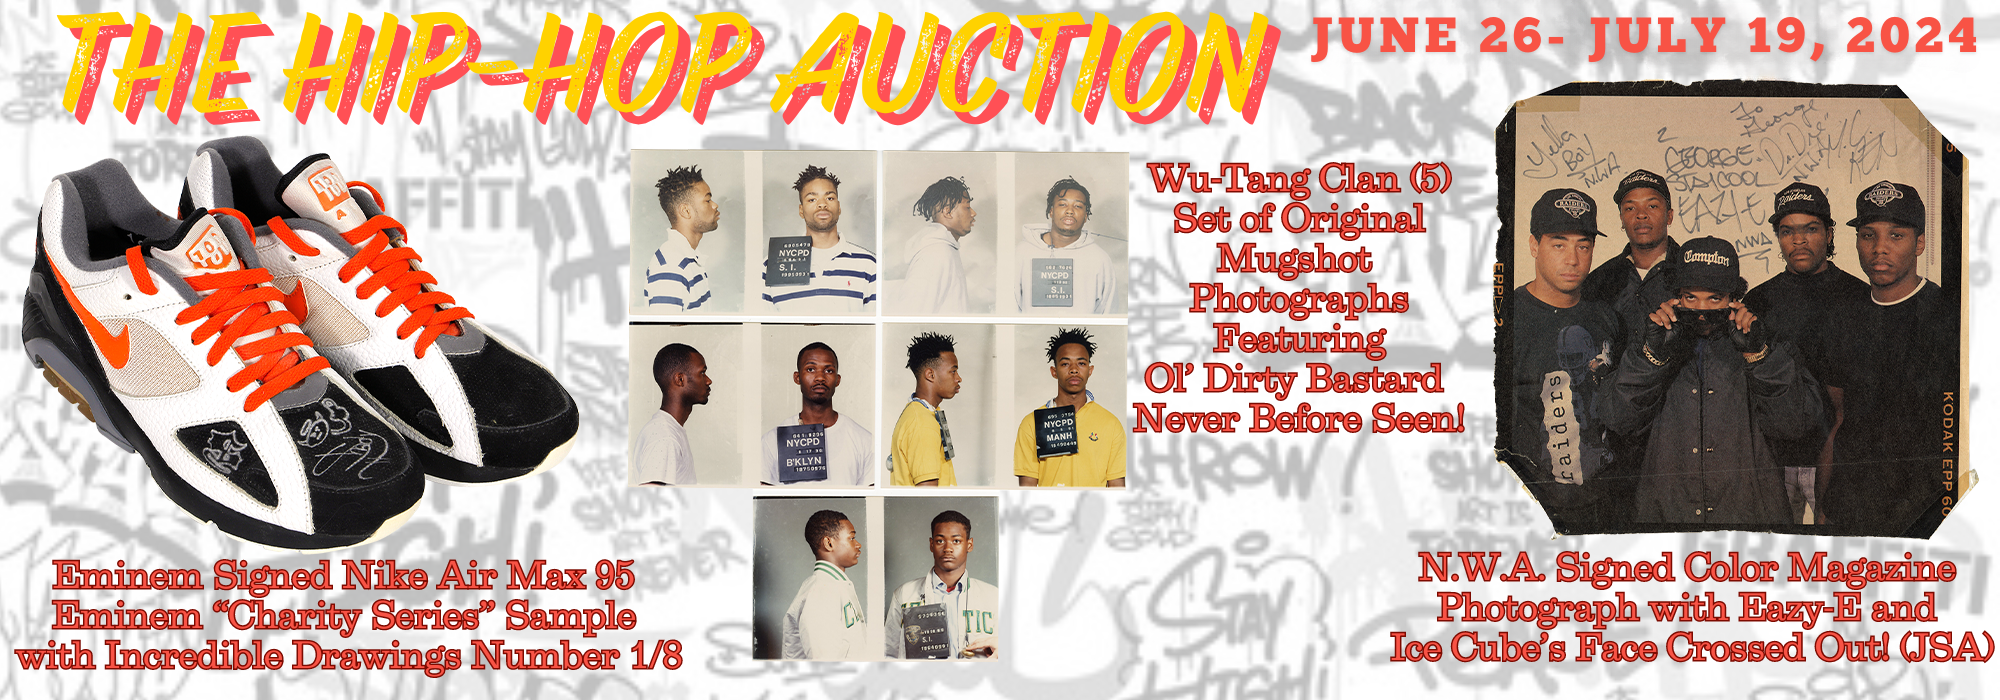 Just Music Auction